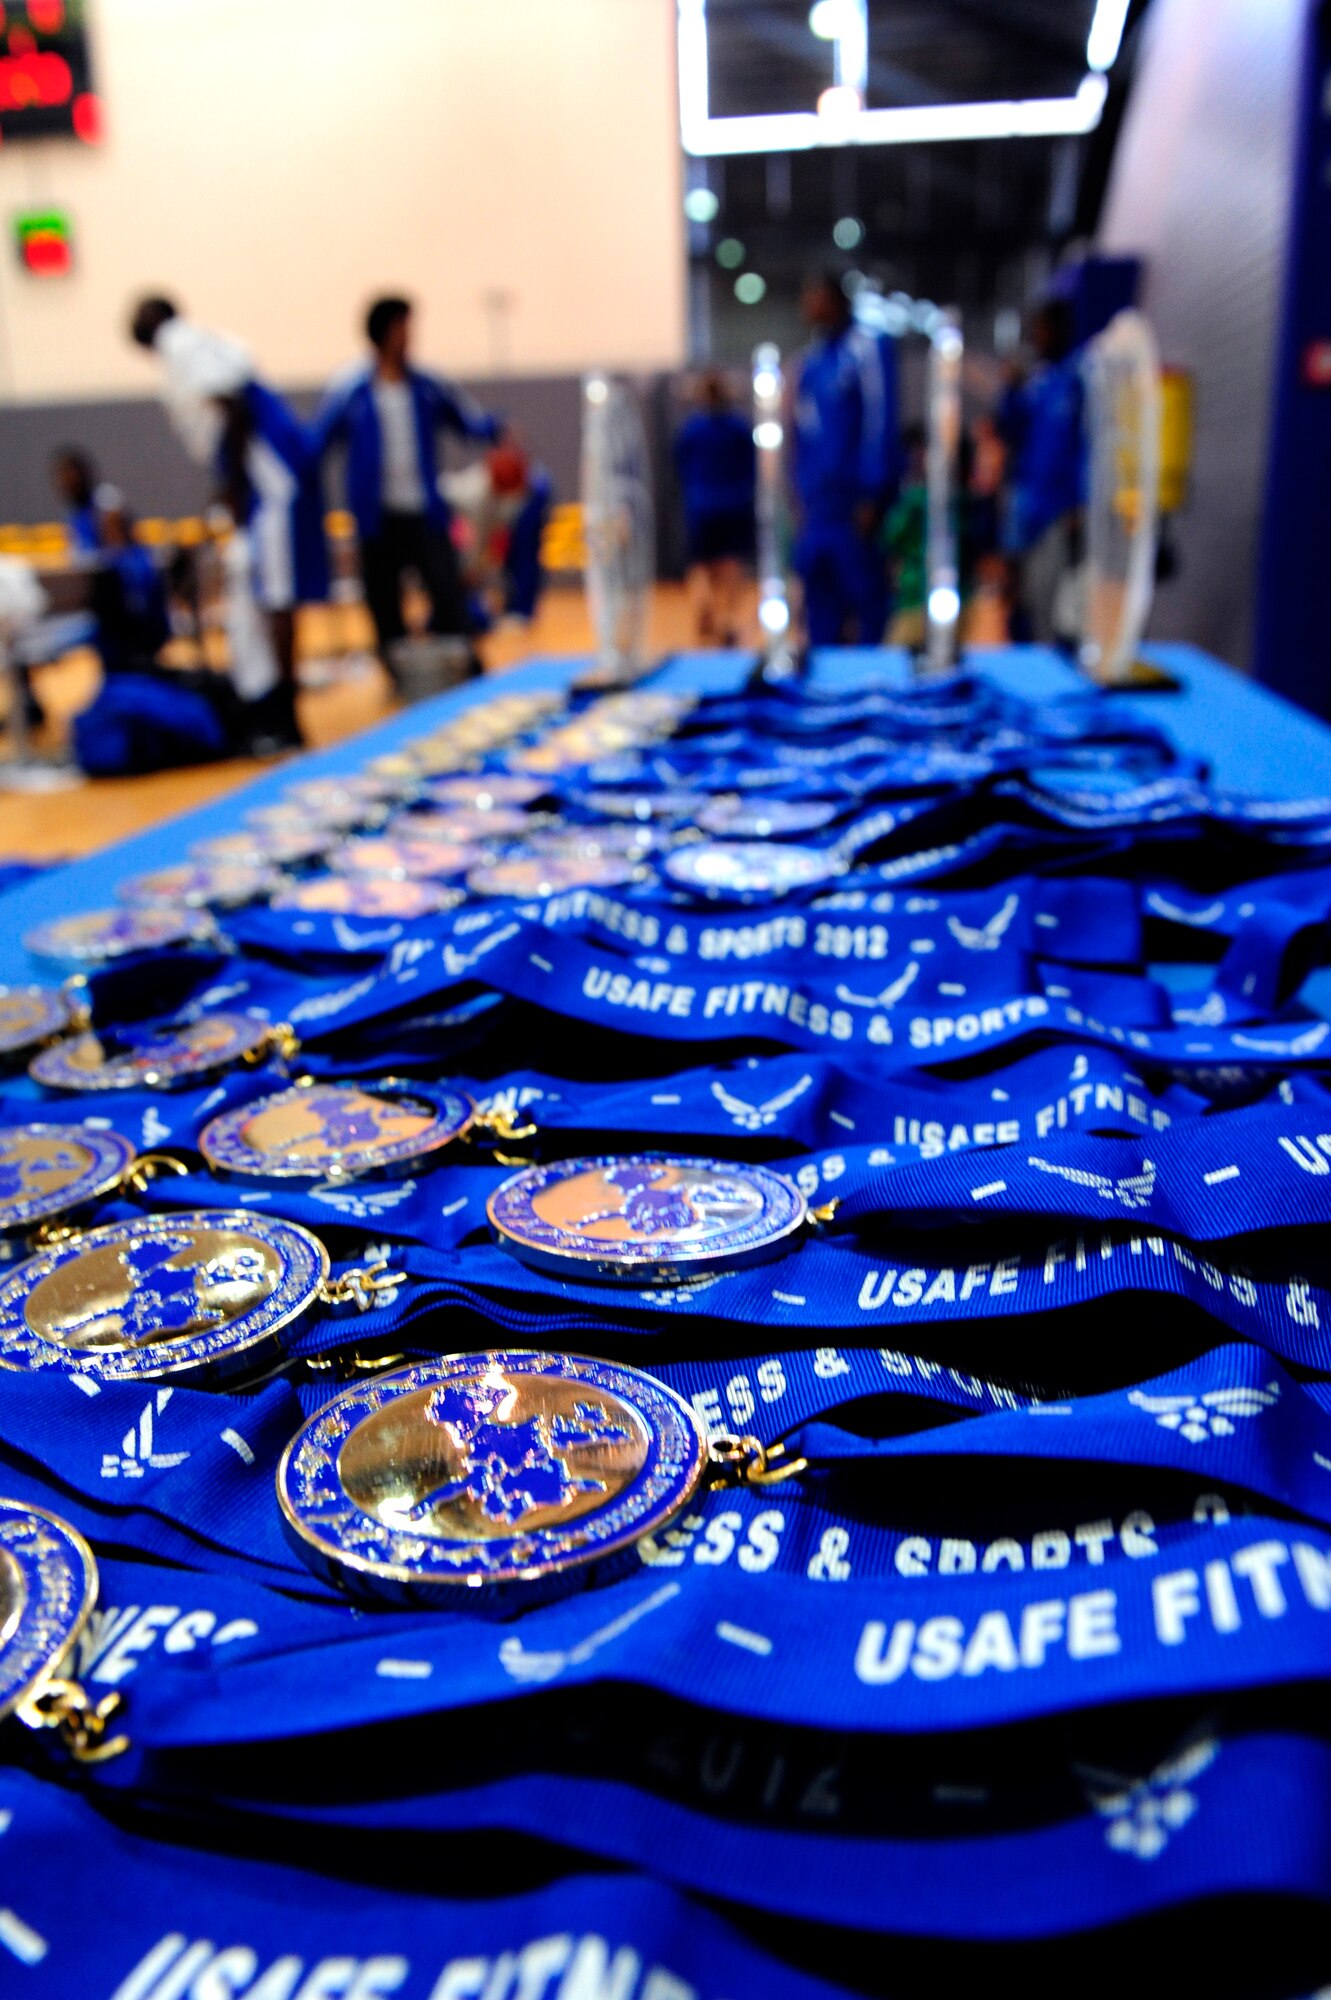 Medals and trophies sit on the sideline waiting to be handed out to the victors of the U.S. forces in Europe basketball tournament, Ramstein Air Base, Germany, April 8, 2012. (U.S. Air Force photo/ Senior Airman Aaron-Forrest Wainwright)